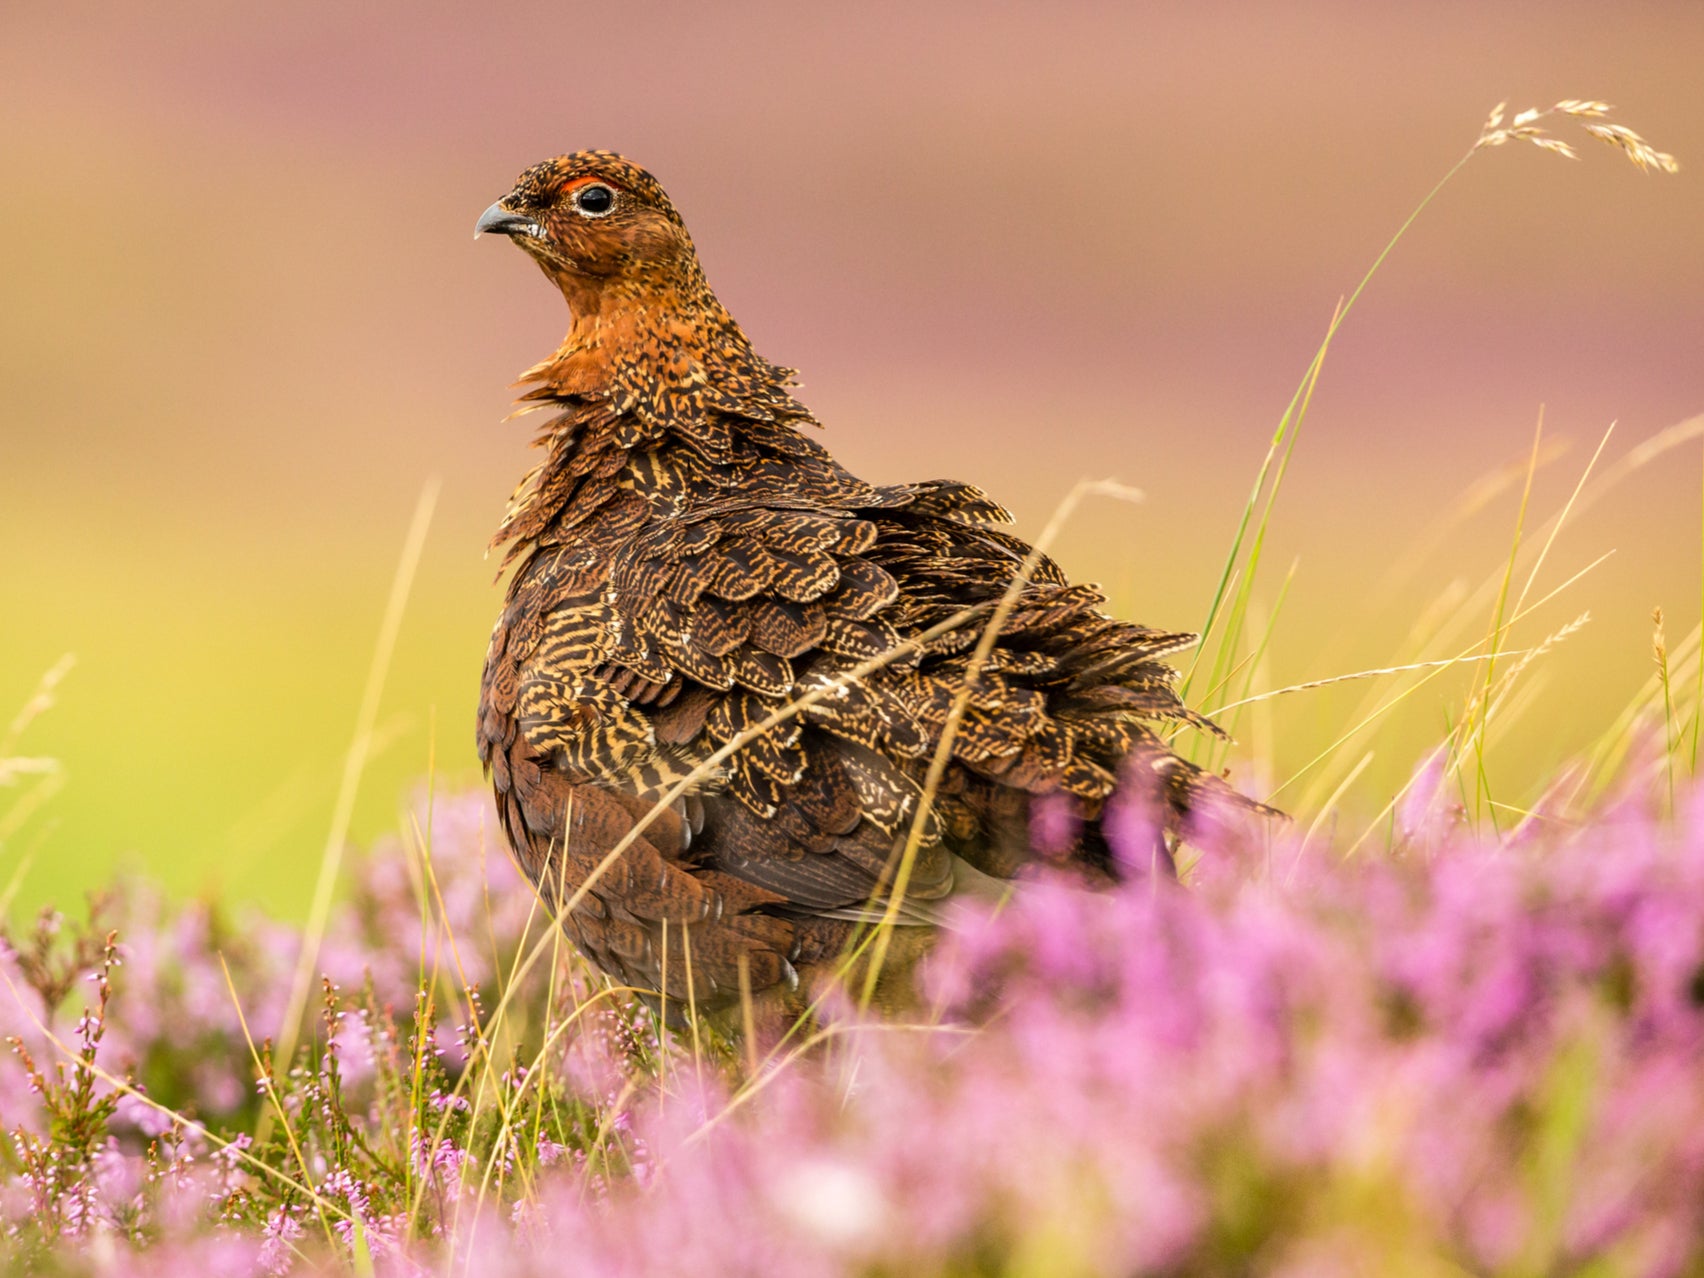 Grouse estates depend on having ‘unnaturally high densities’ of red grouse which live in artificially maintained landscapes rich in heather, requiring burning to maintain